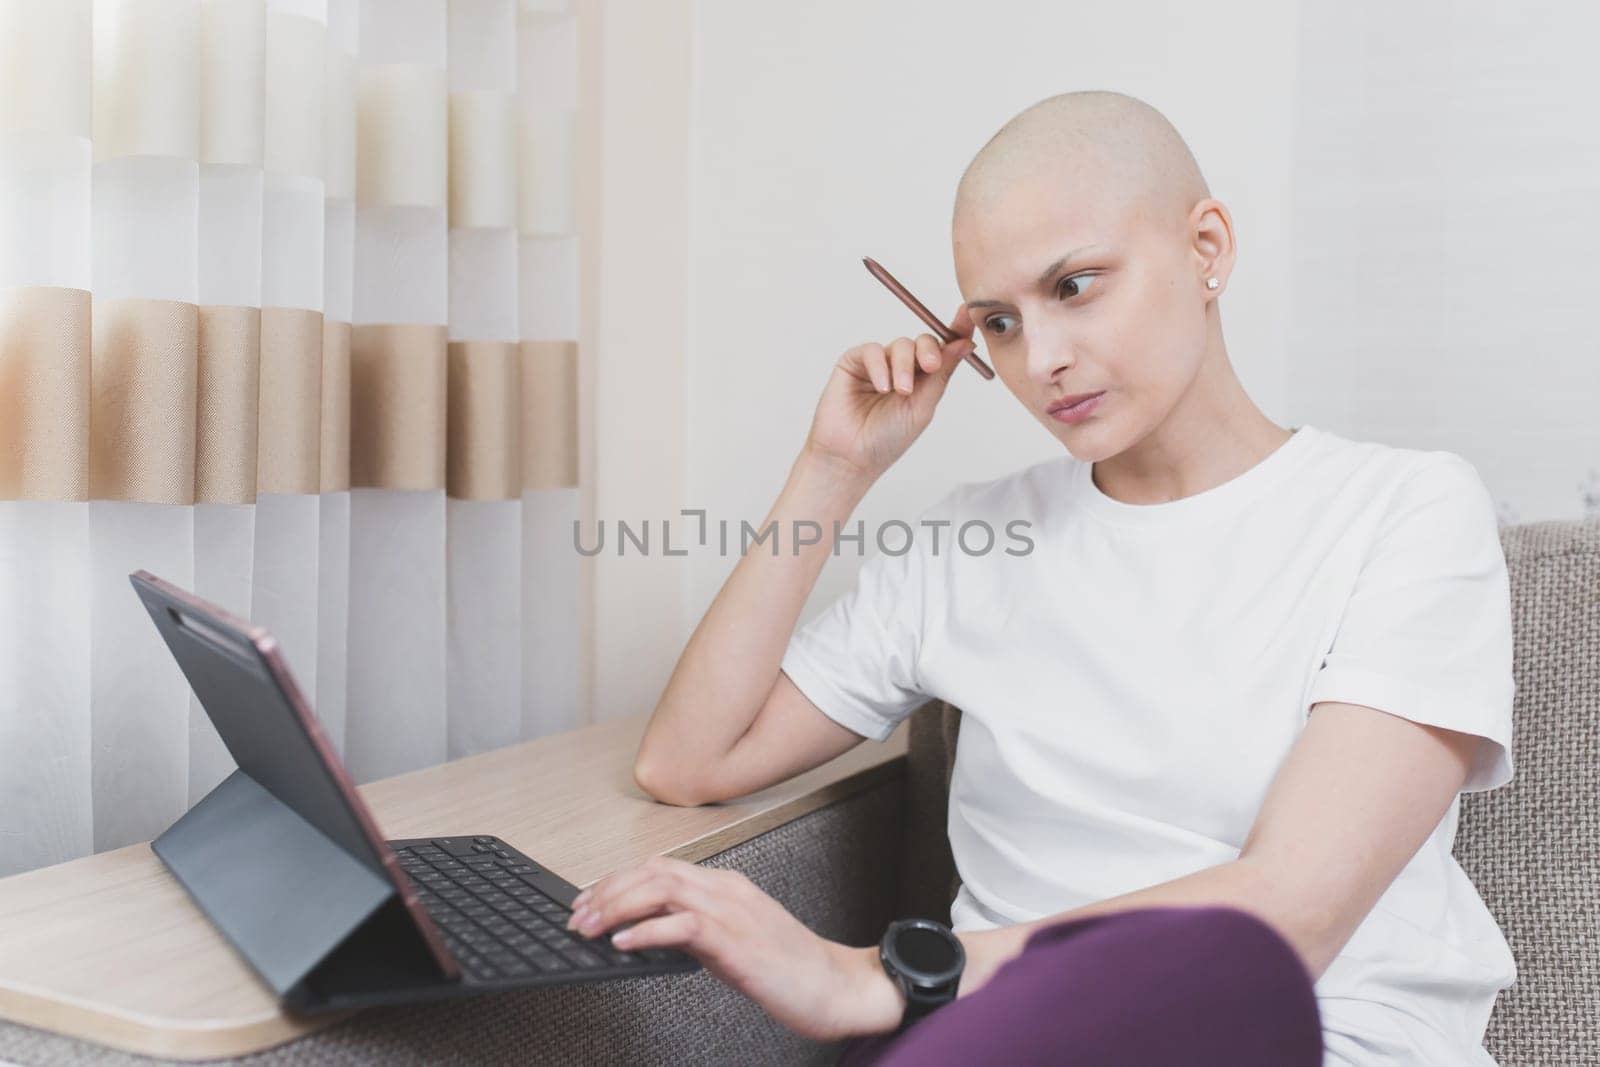 Hairless young woman with cancer wearing a white t-shirt working at laptop in room by Rom4ek